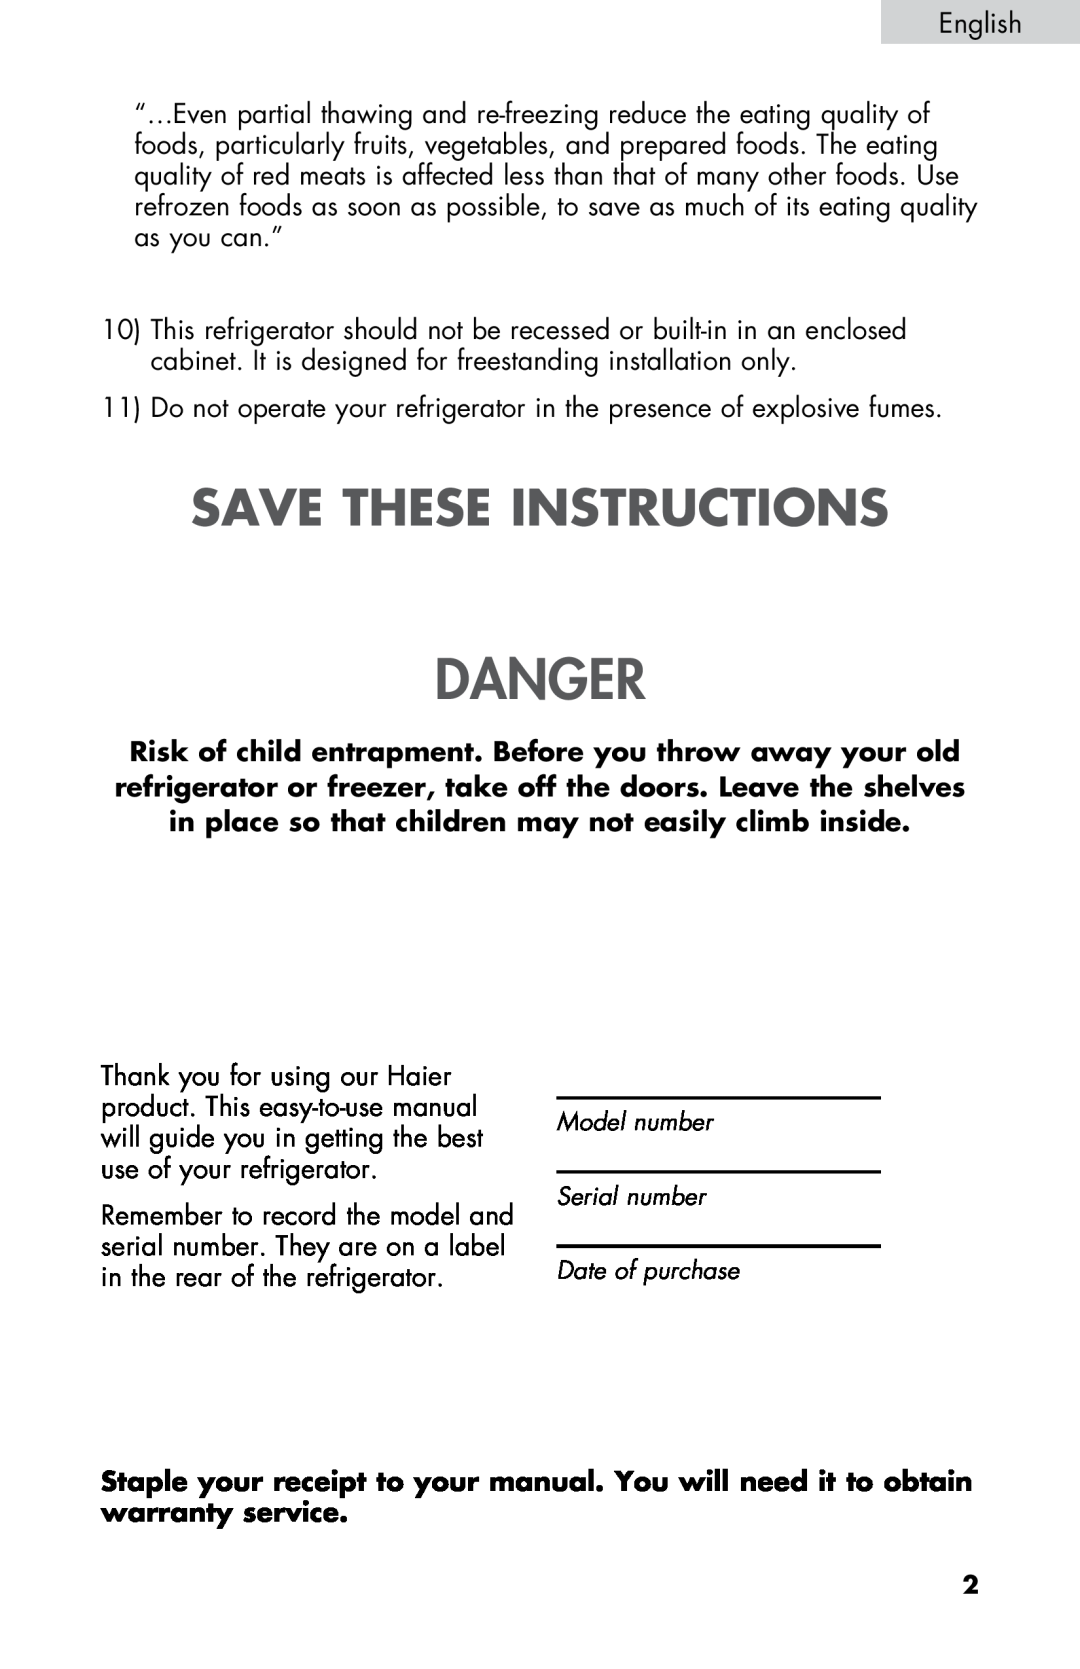 Haier HNSE045VS user manual Save These Instructions, Danger 